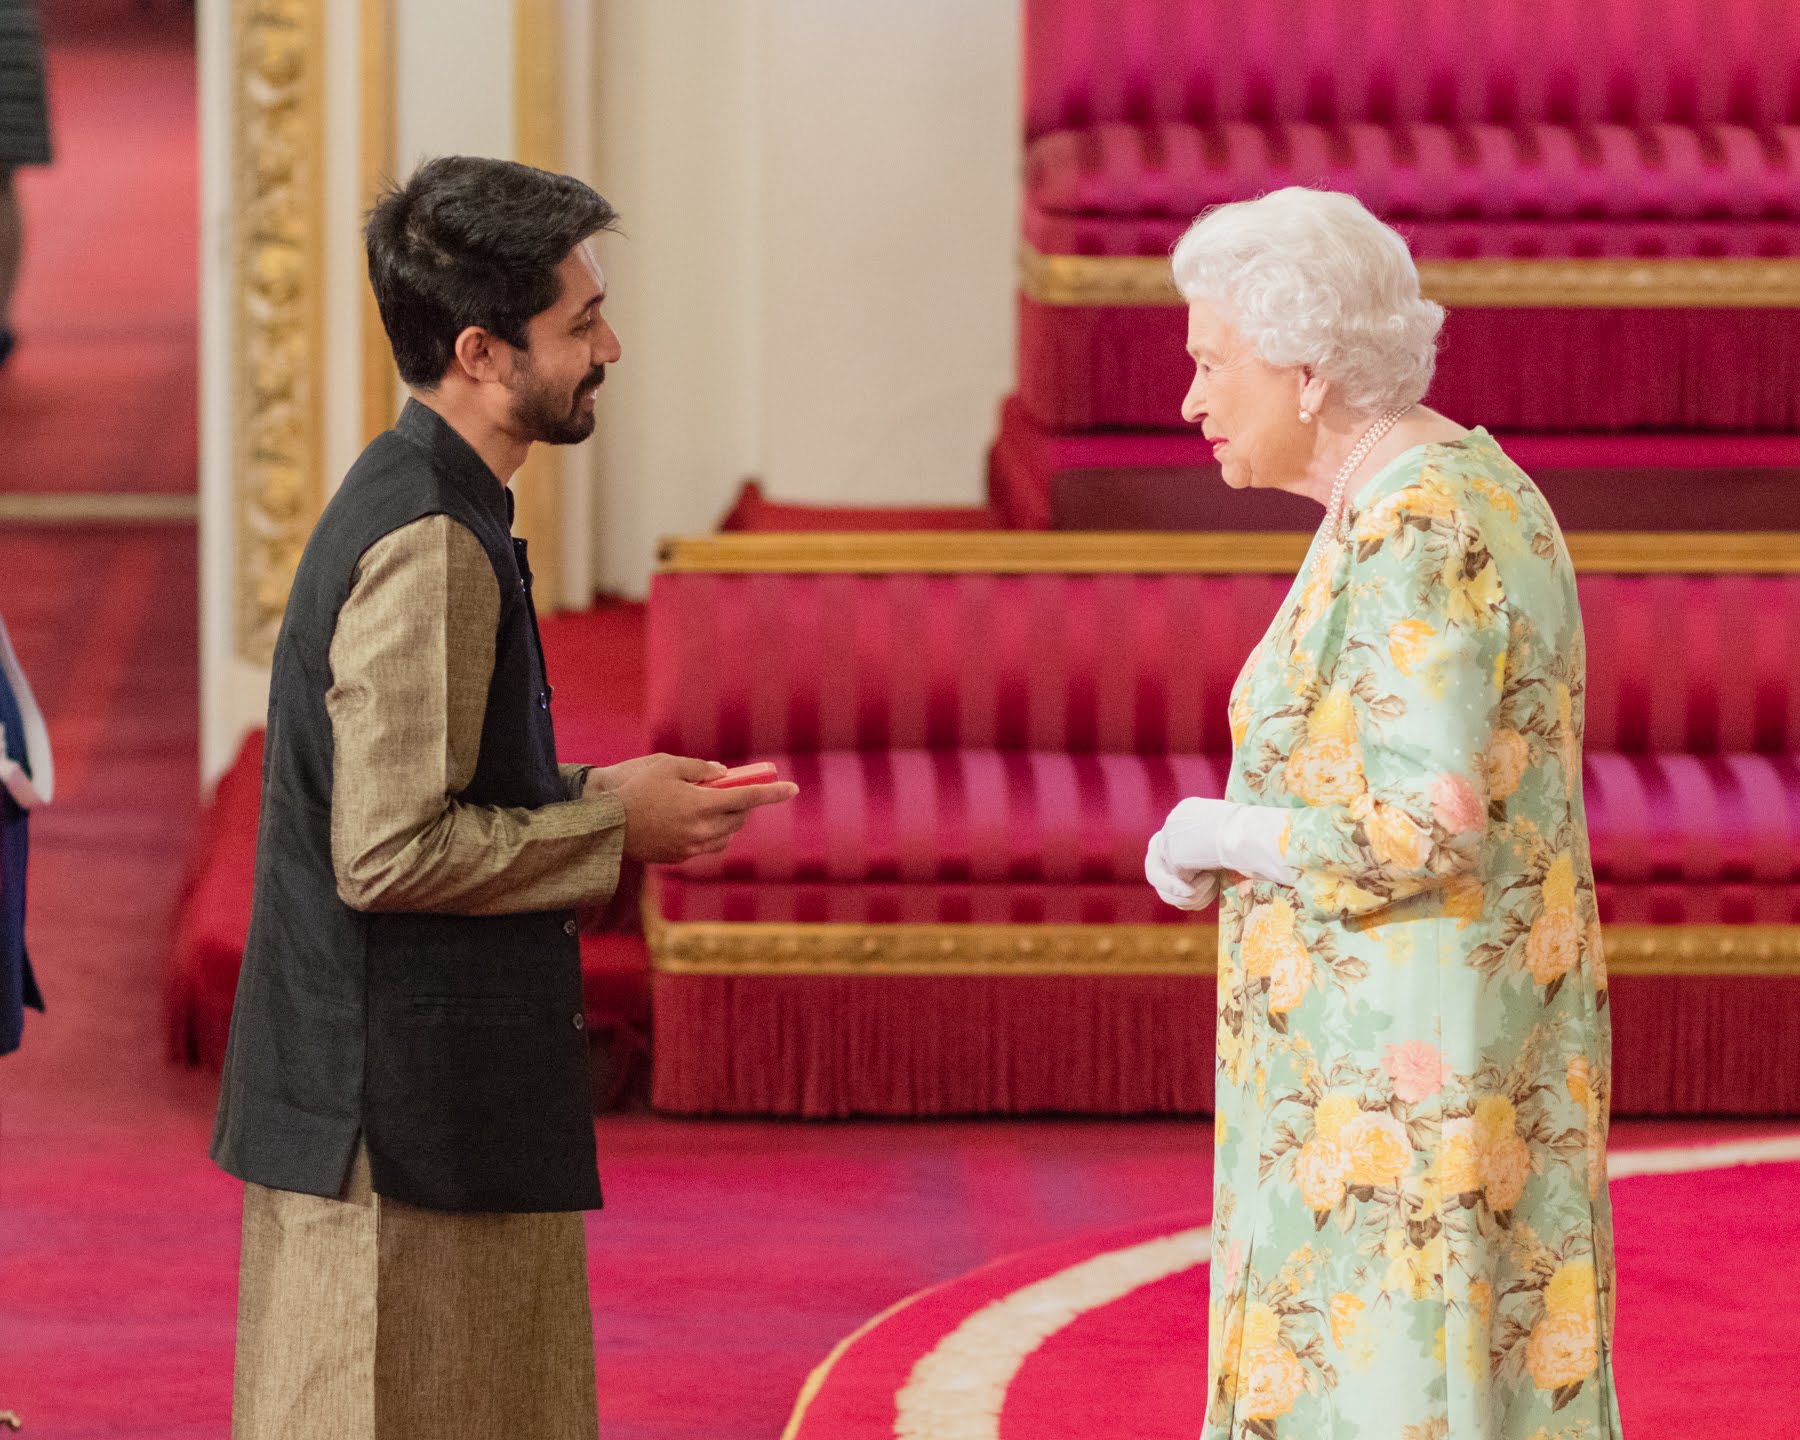 Ayman Sadiq 2018 Queen's Young Leader from Bangladesh